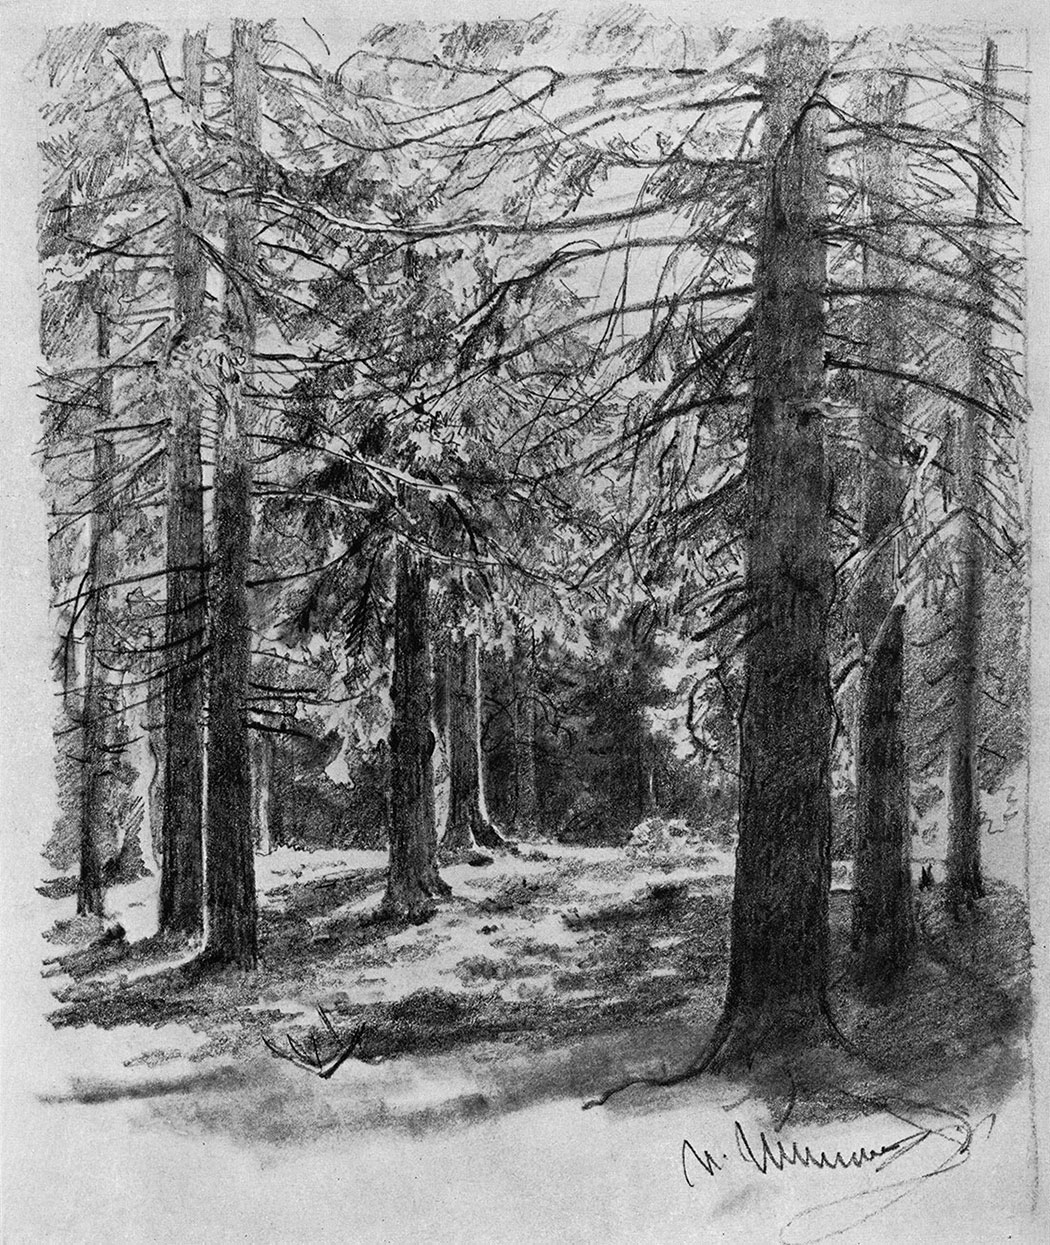 117. Fir-trees lit up by the sun. 1880s. Load pencil on paper. 29.8X23.3 cm. The Tretyakov Gallery, Moscow